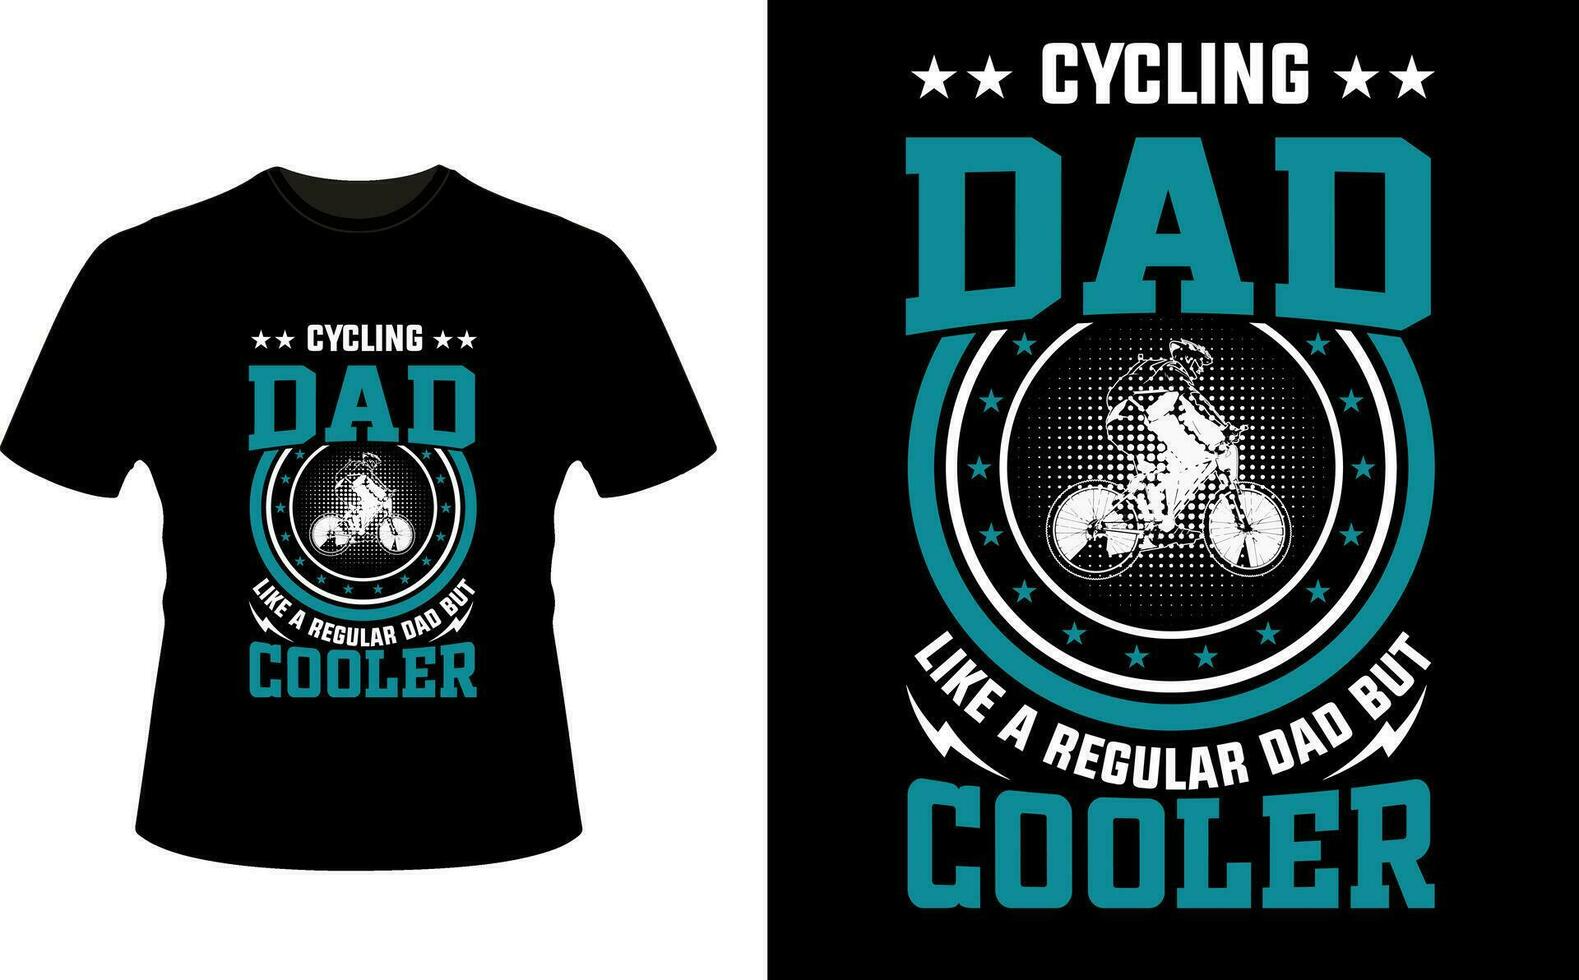 Cycling Dad Like a Regular Dad But Cooler or dad papa tshirt design or Father day t shirt Design vector